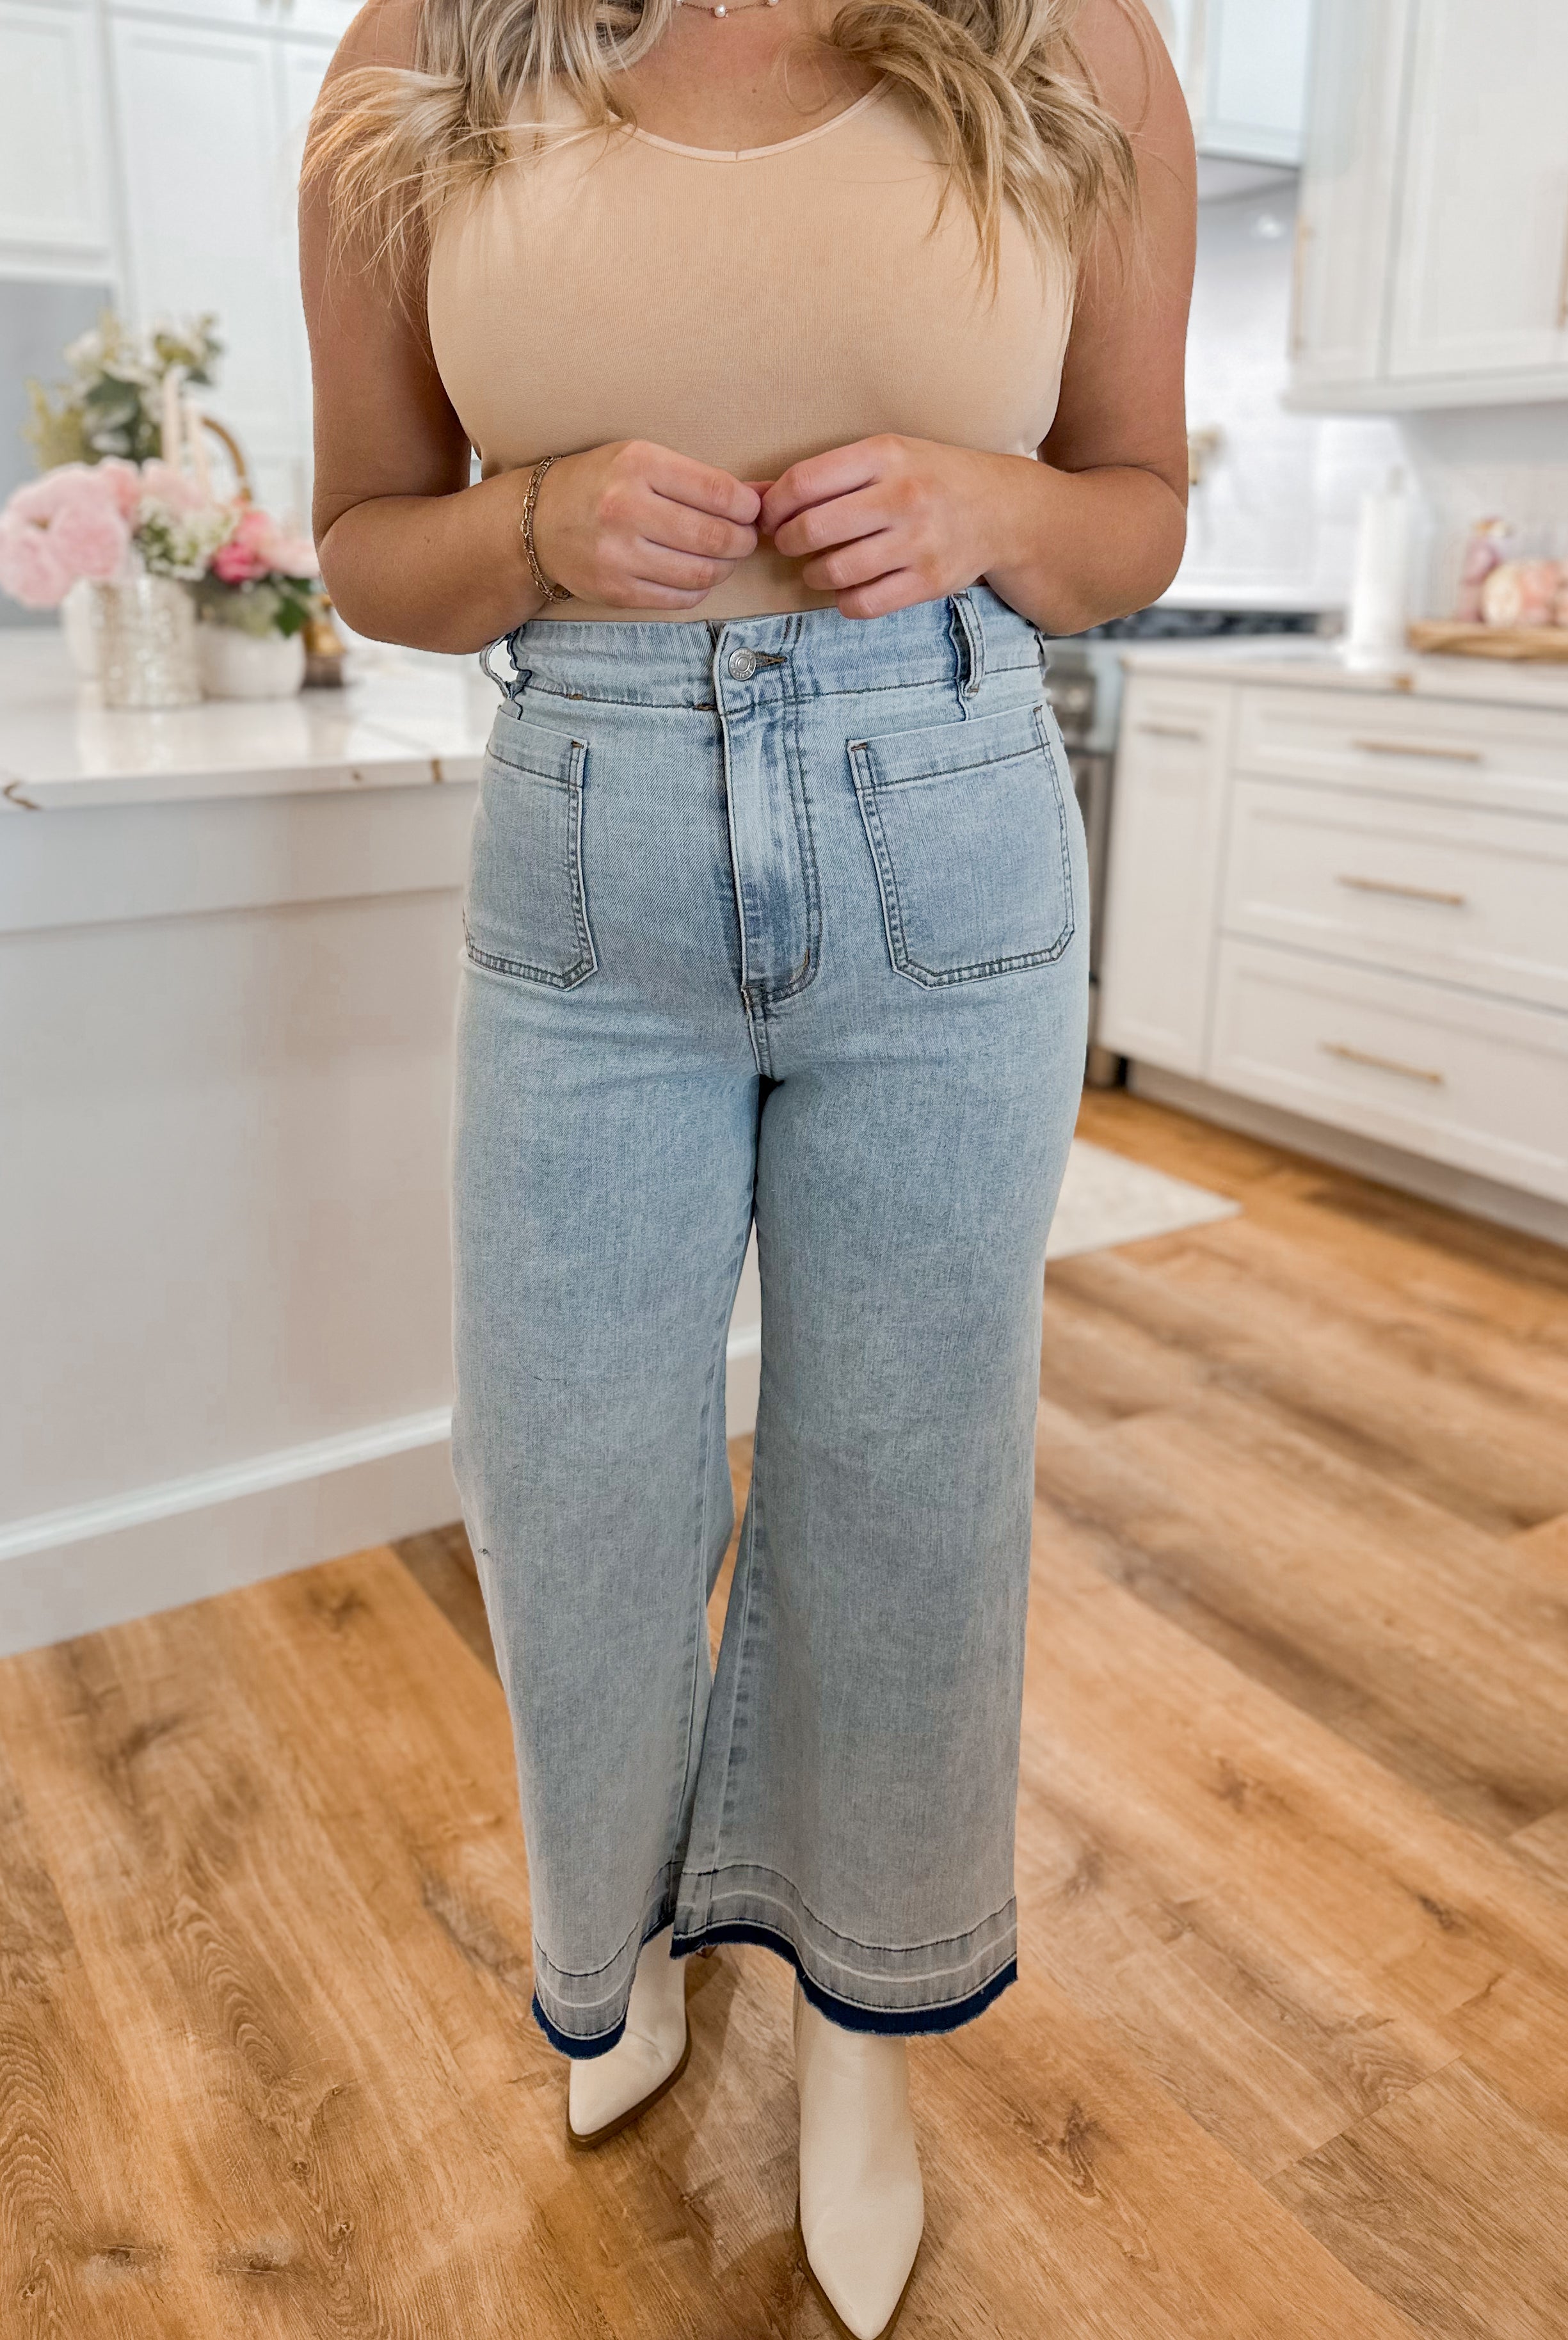 Blake Mineral Washed Denim Cropped Pant Bottoms - Be You Boutique